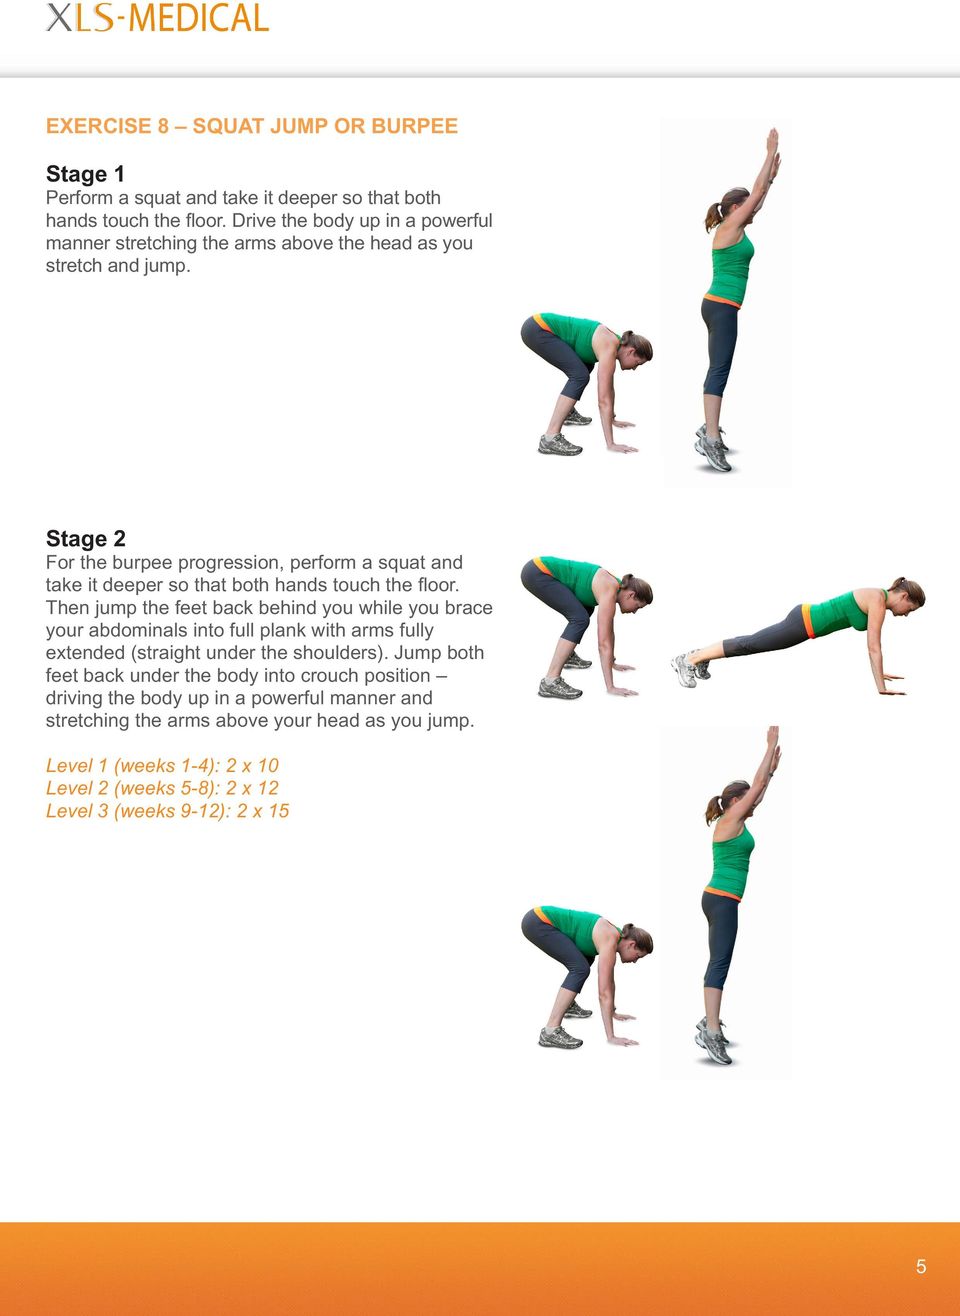 Stage 2 For the burpee progression, perform a squat and take it deeper so that both hands touch the floor.